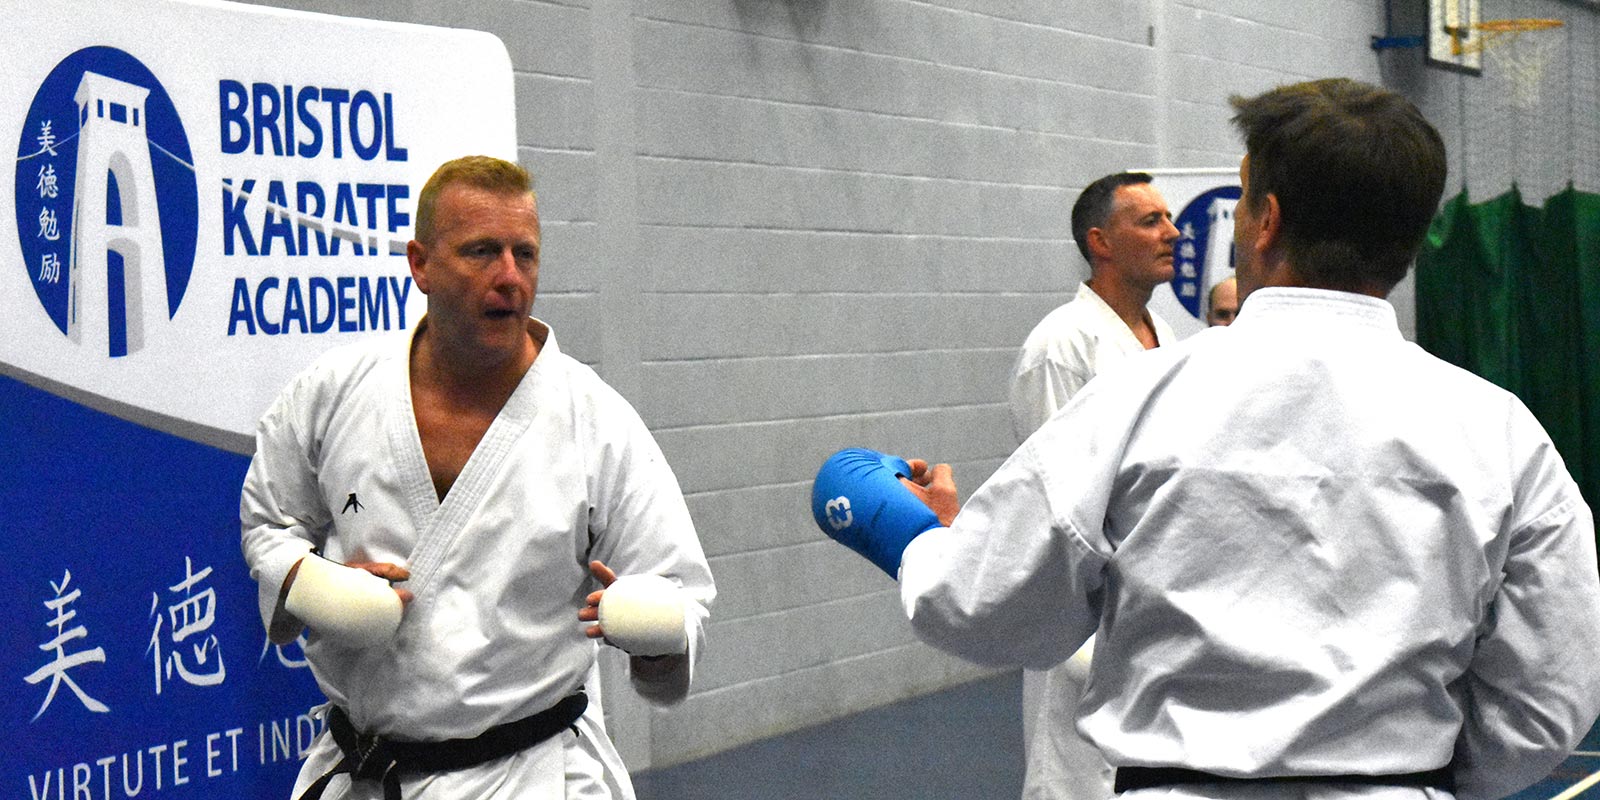 Ian Connell Sensei faces off during kumite training